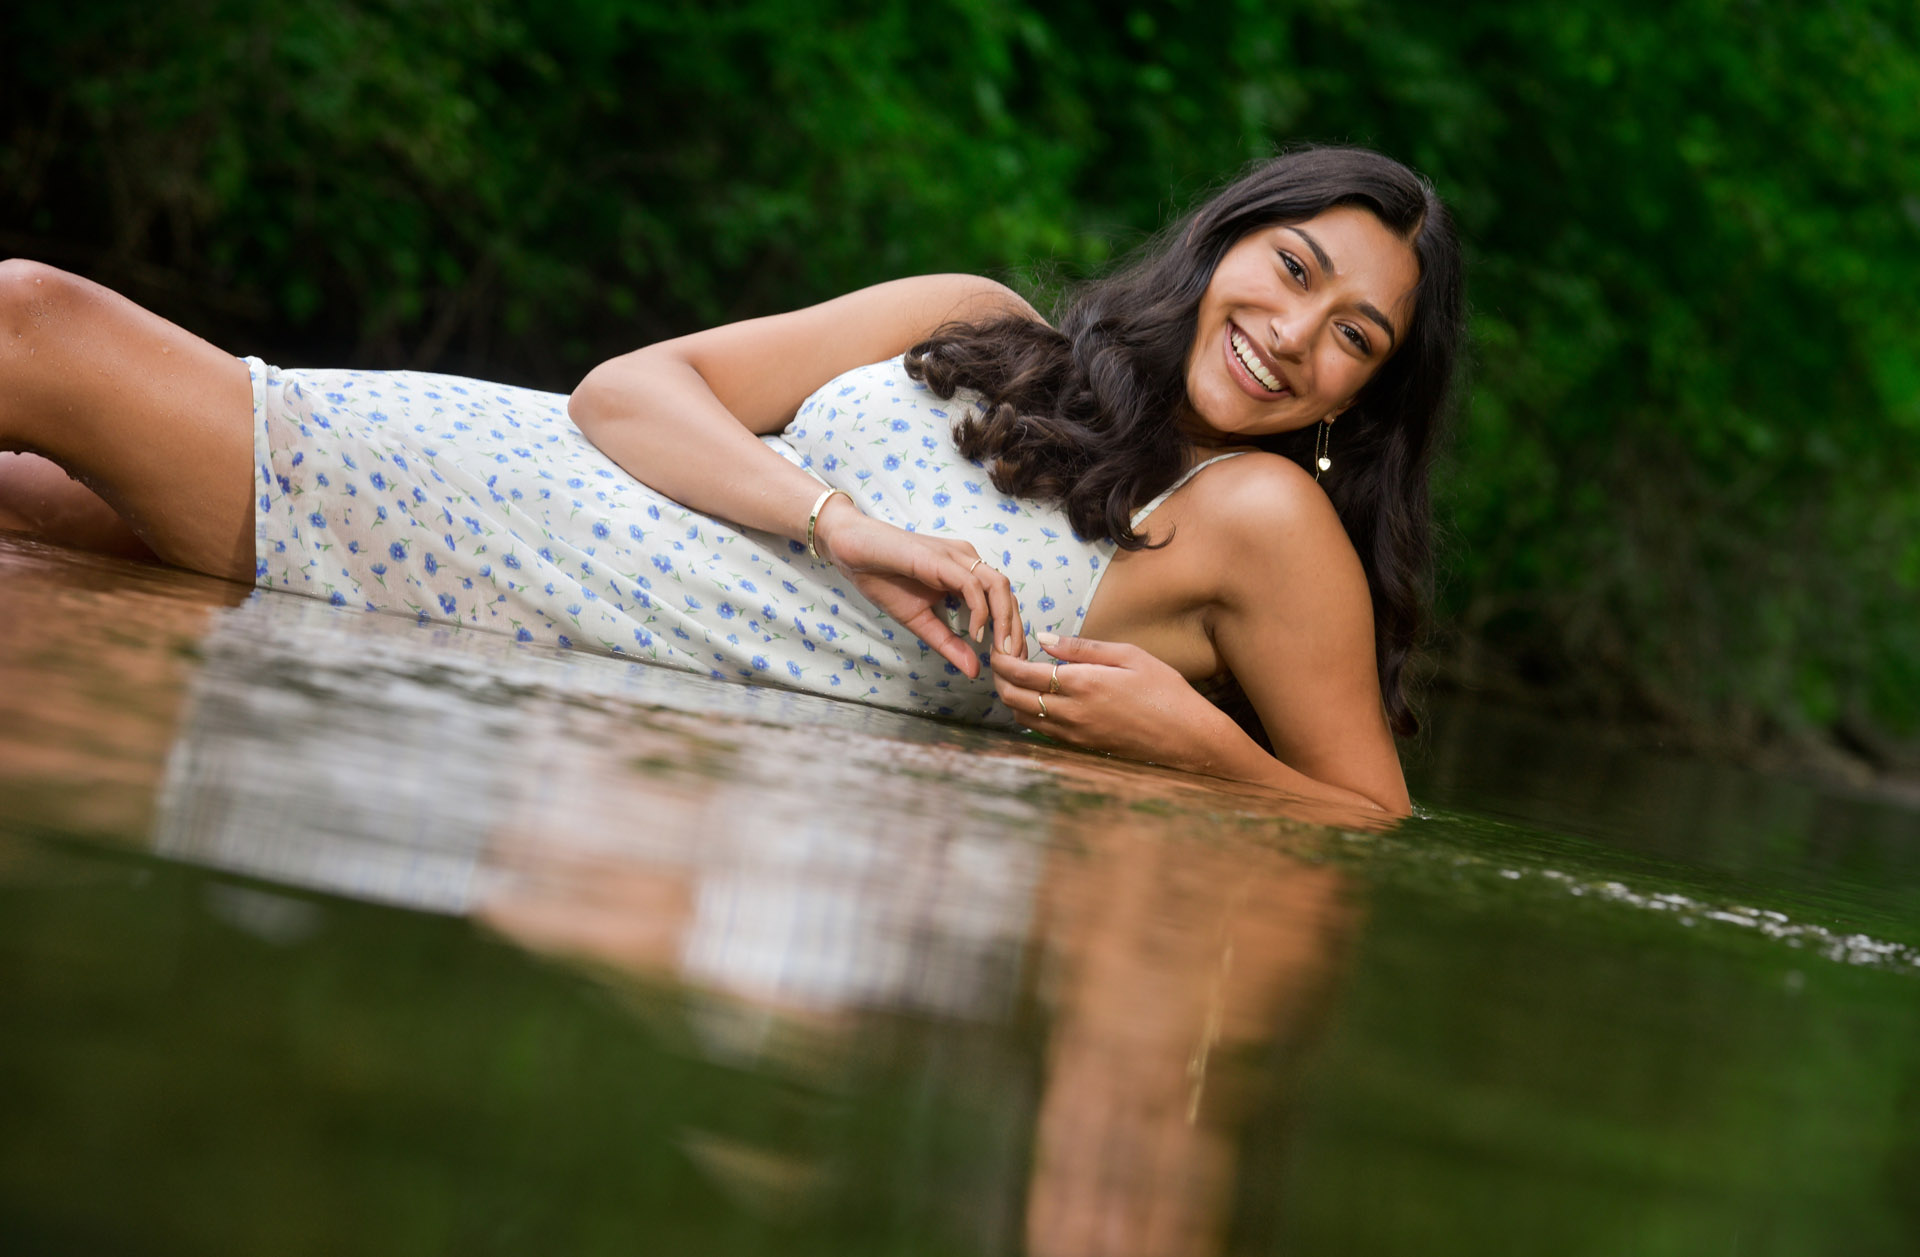 Rochester high school senior poses in a river in Rochester, Michigan for this lovely, unique senior picture.